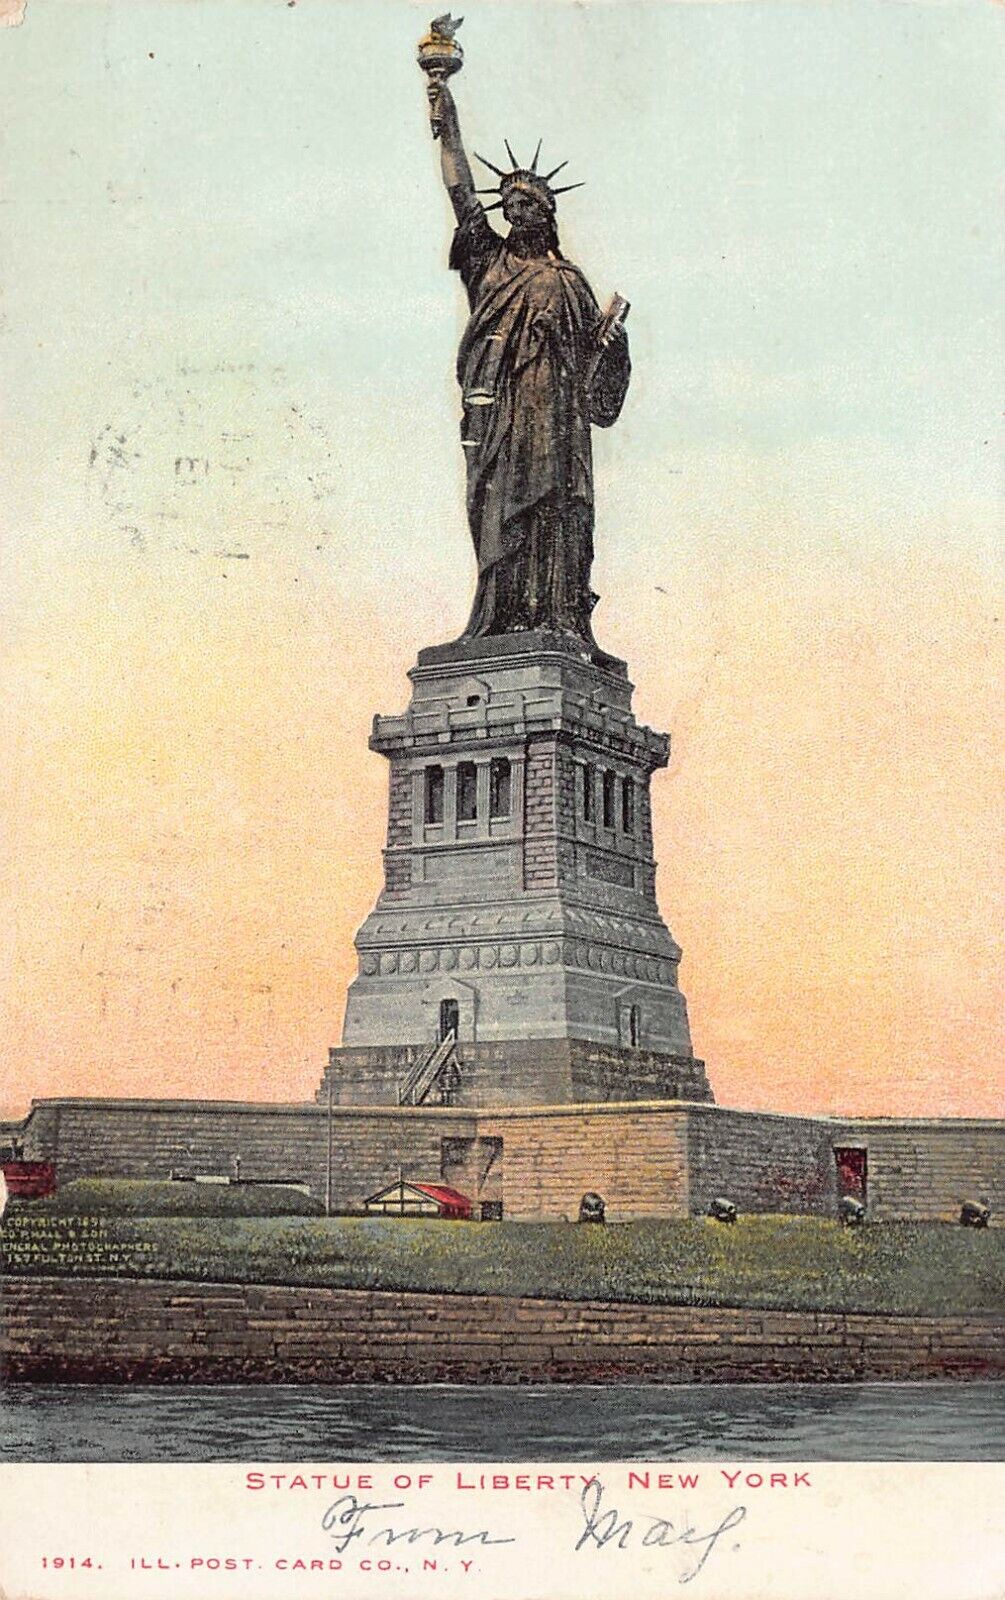 Statue of Liberty, New York City, N.Y., Very Early Postcard, Used in 1906